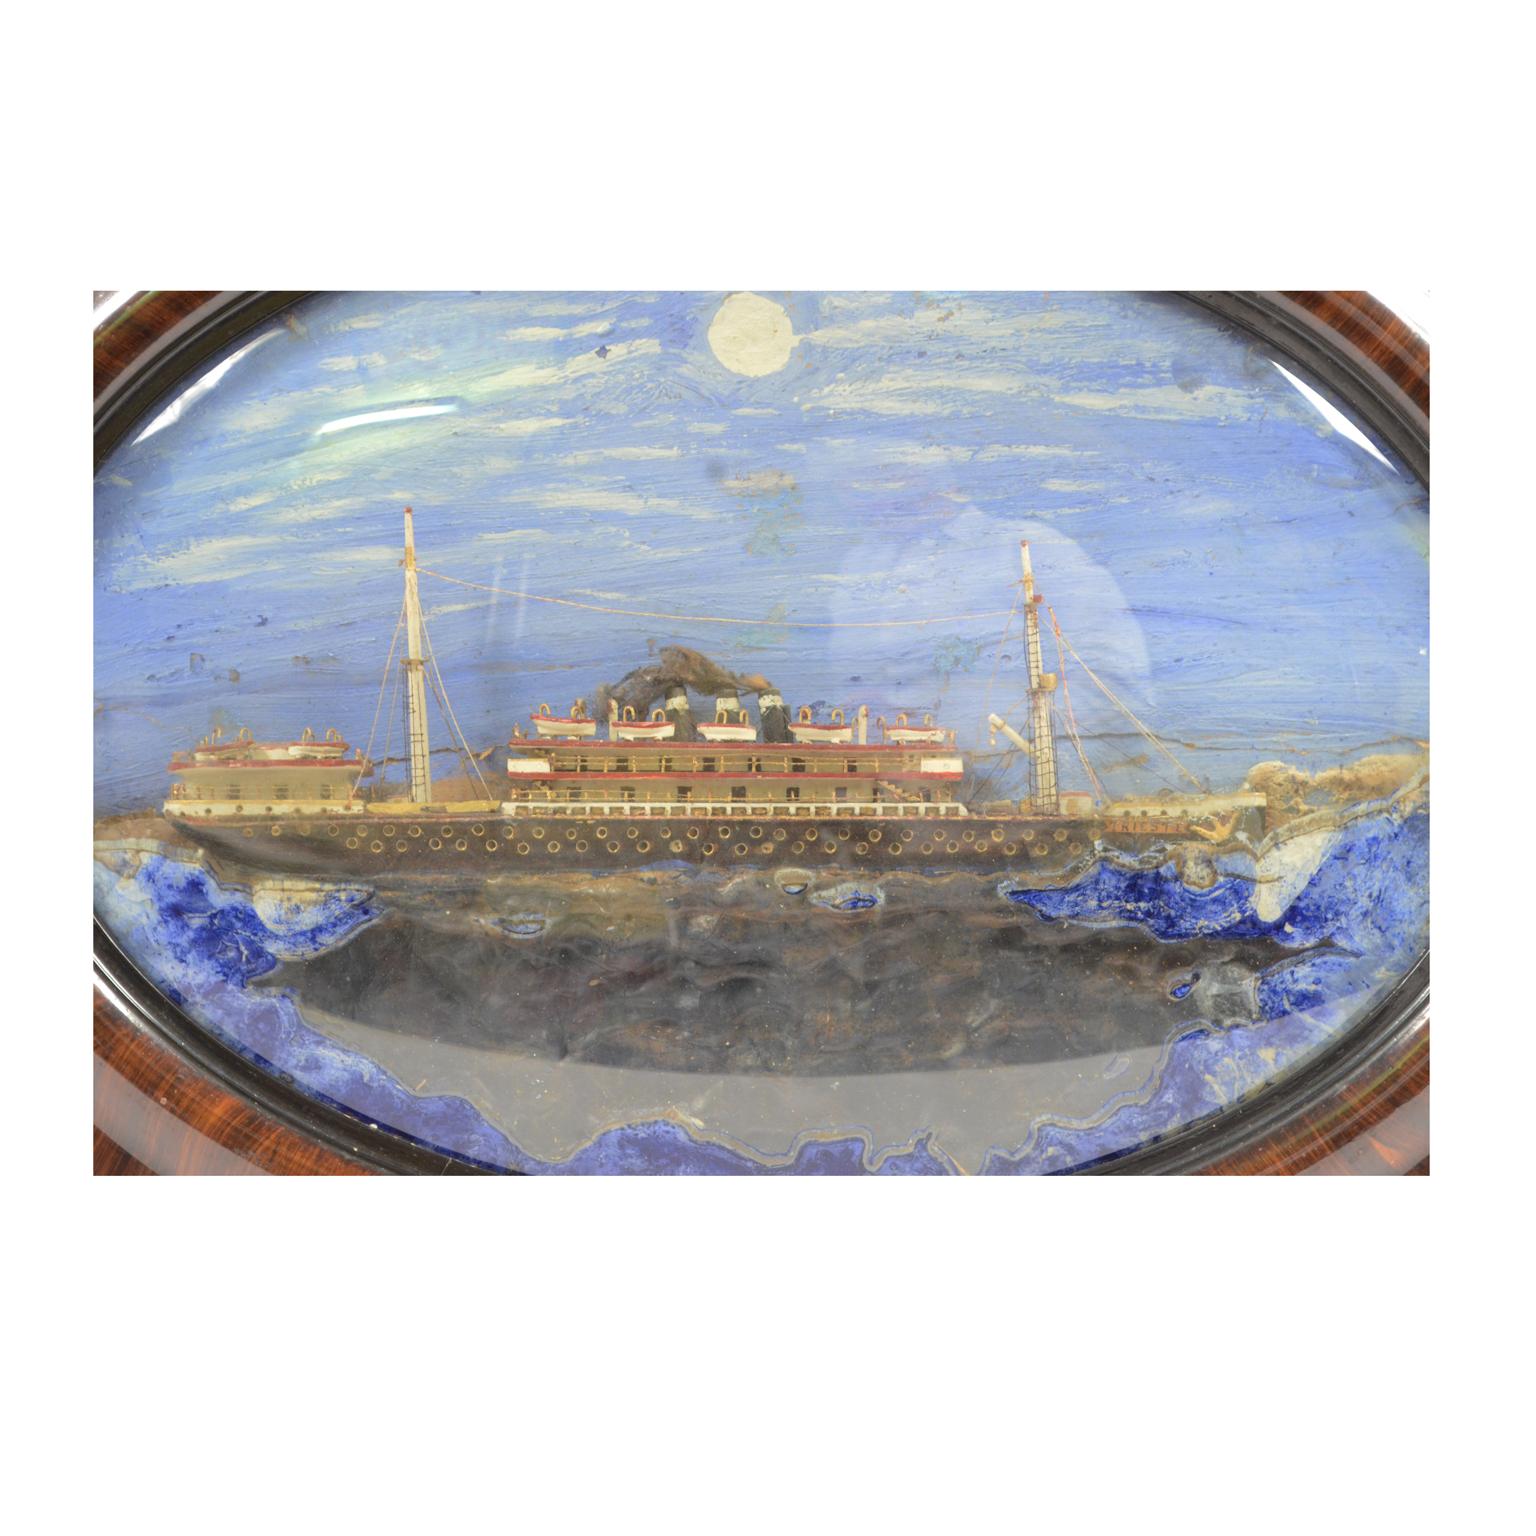 Glass Naval Diorama of the Trieste Steamship Launched in 1908